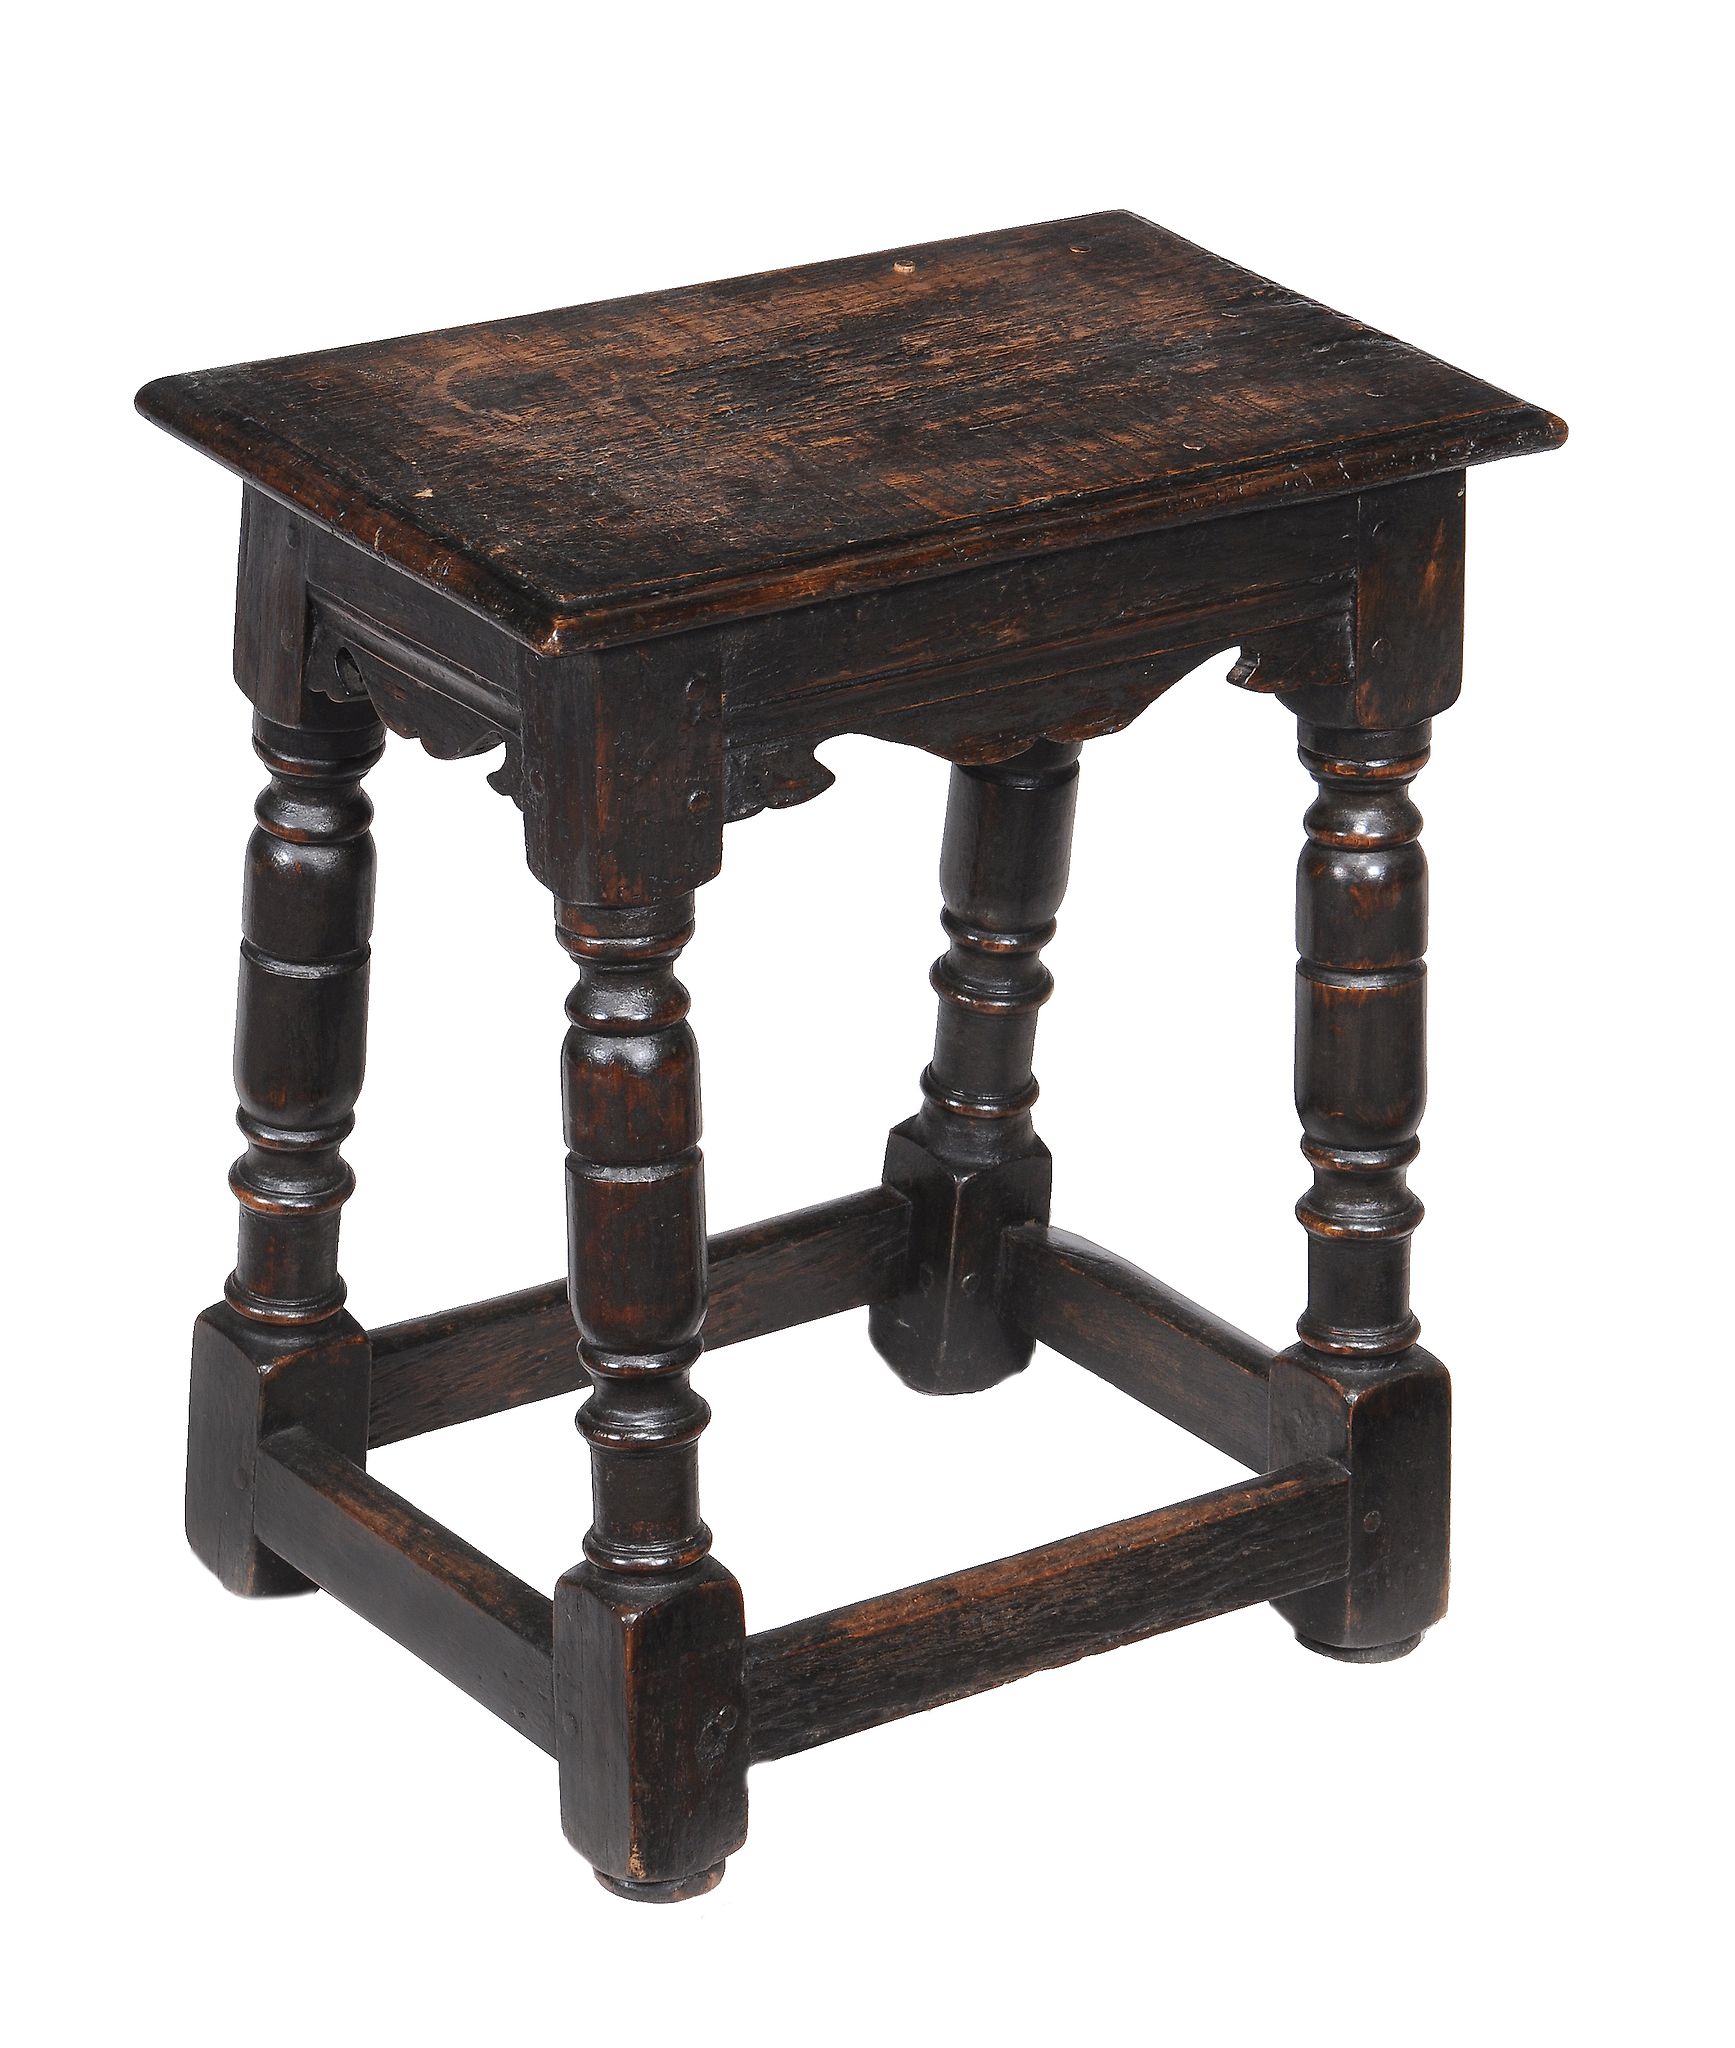 An oak joint stool in Charles I style , the solid seat above turned legs and peripheral stretchers